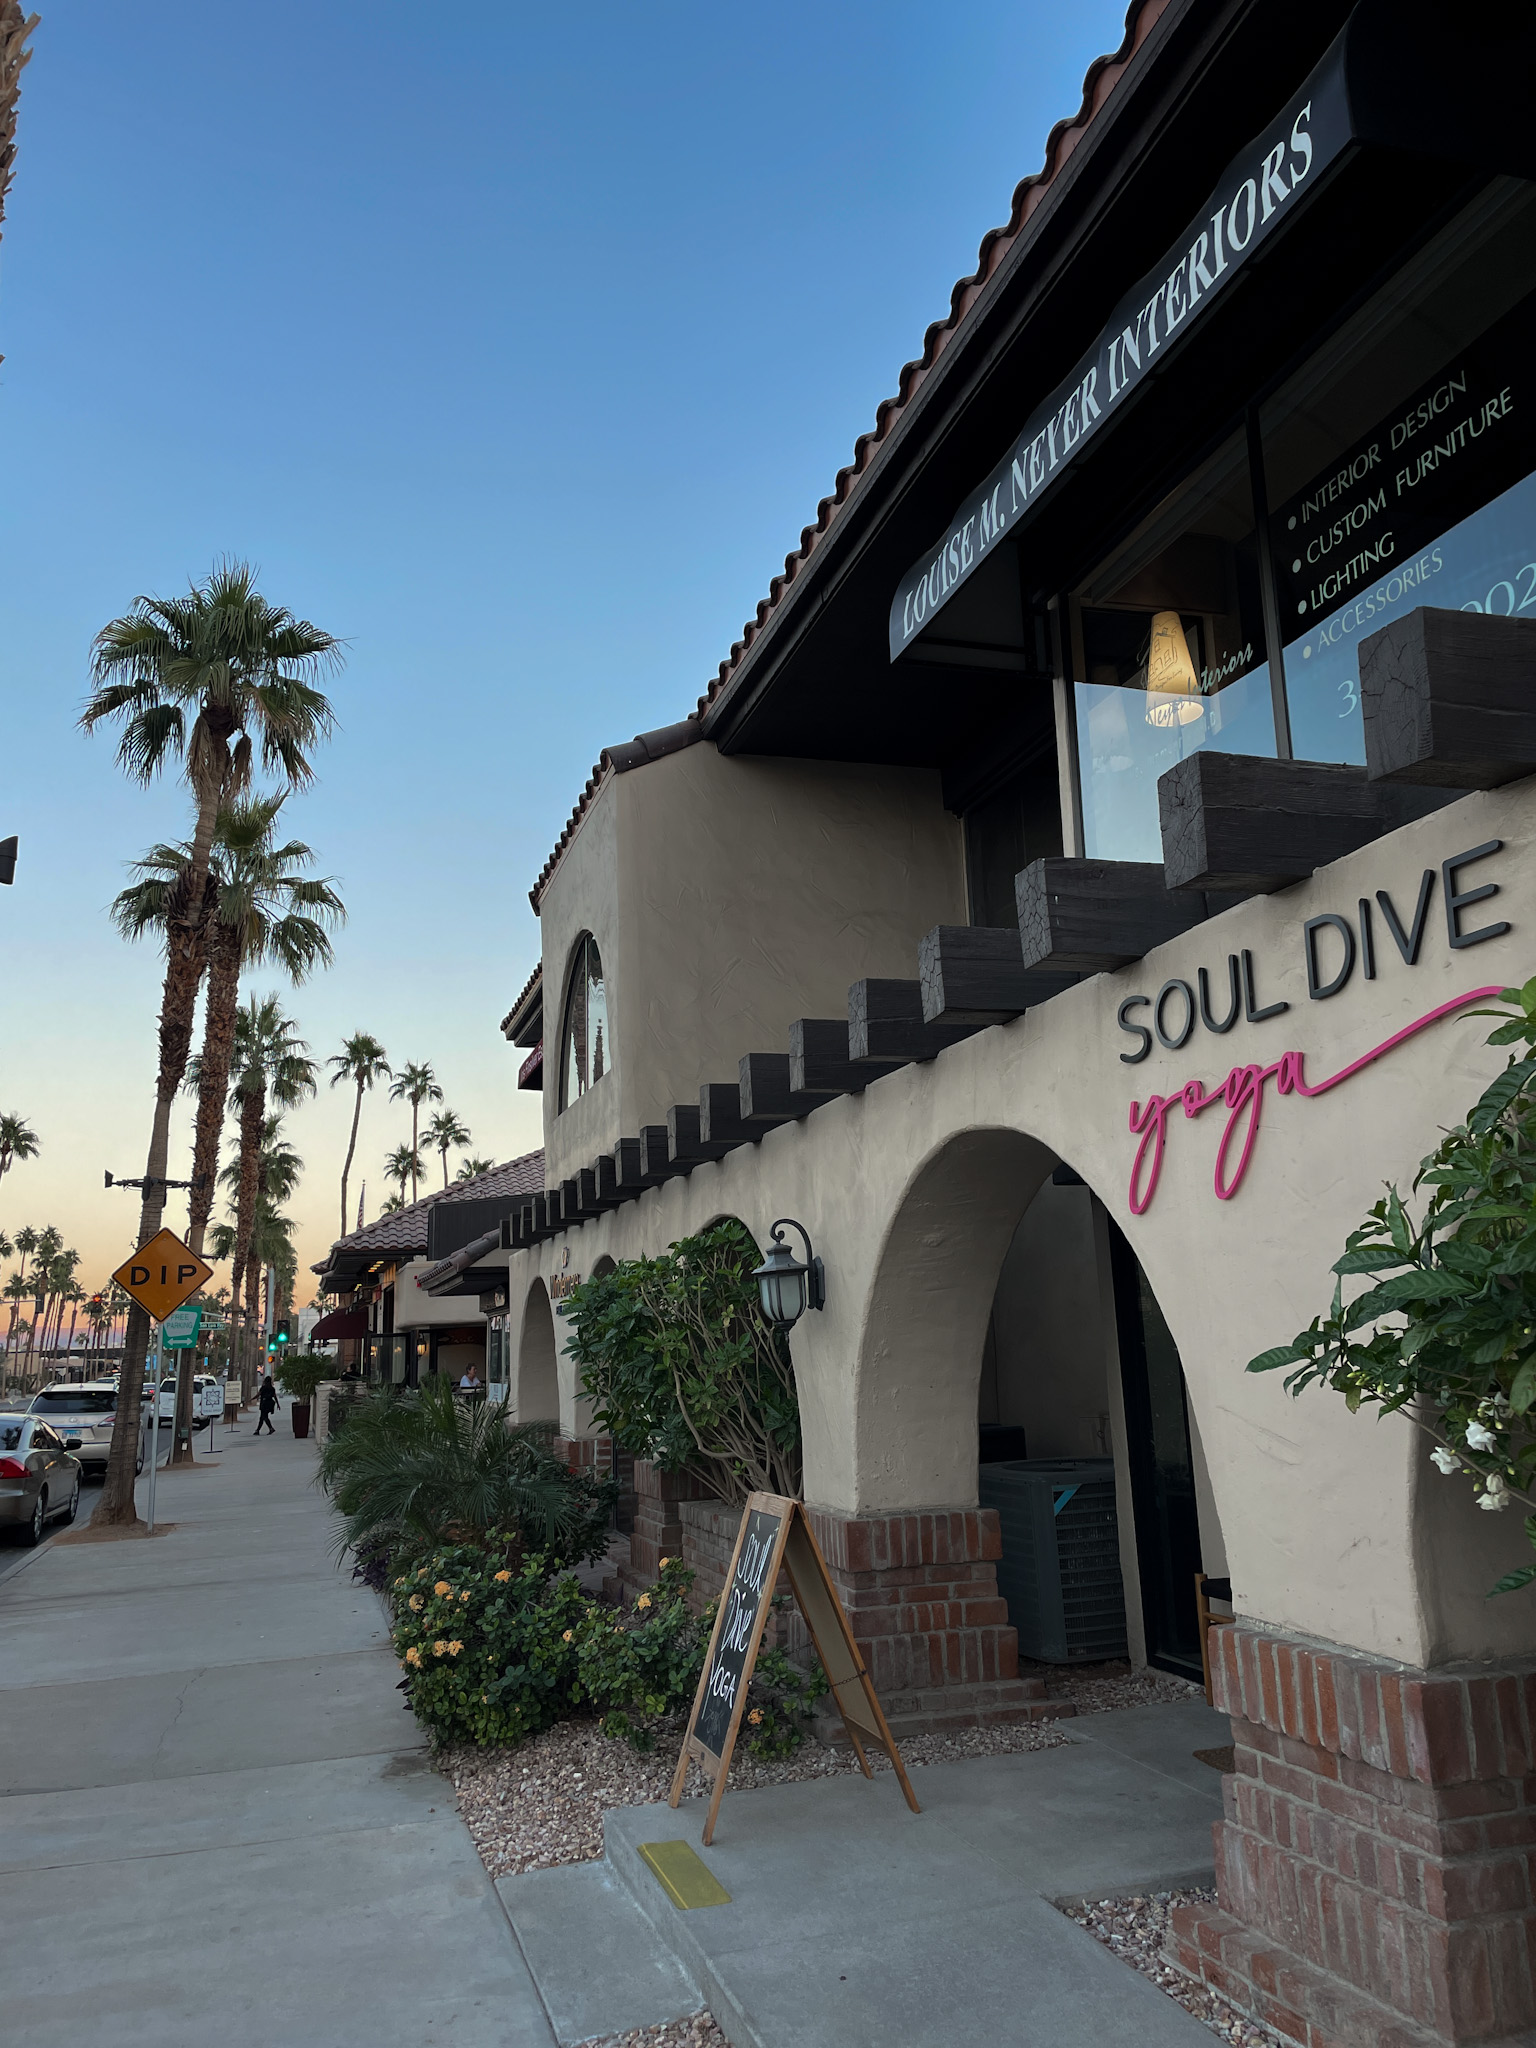 Soul Dive Yoga: An Oasis of Well-being in Greater Palm Springs | www.aestheticstraveler.com Travel & Design Editorial | IG: @itskarenalexandra